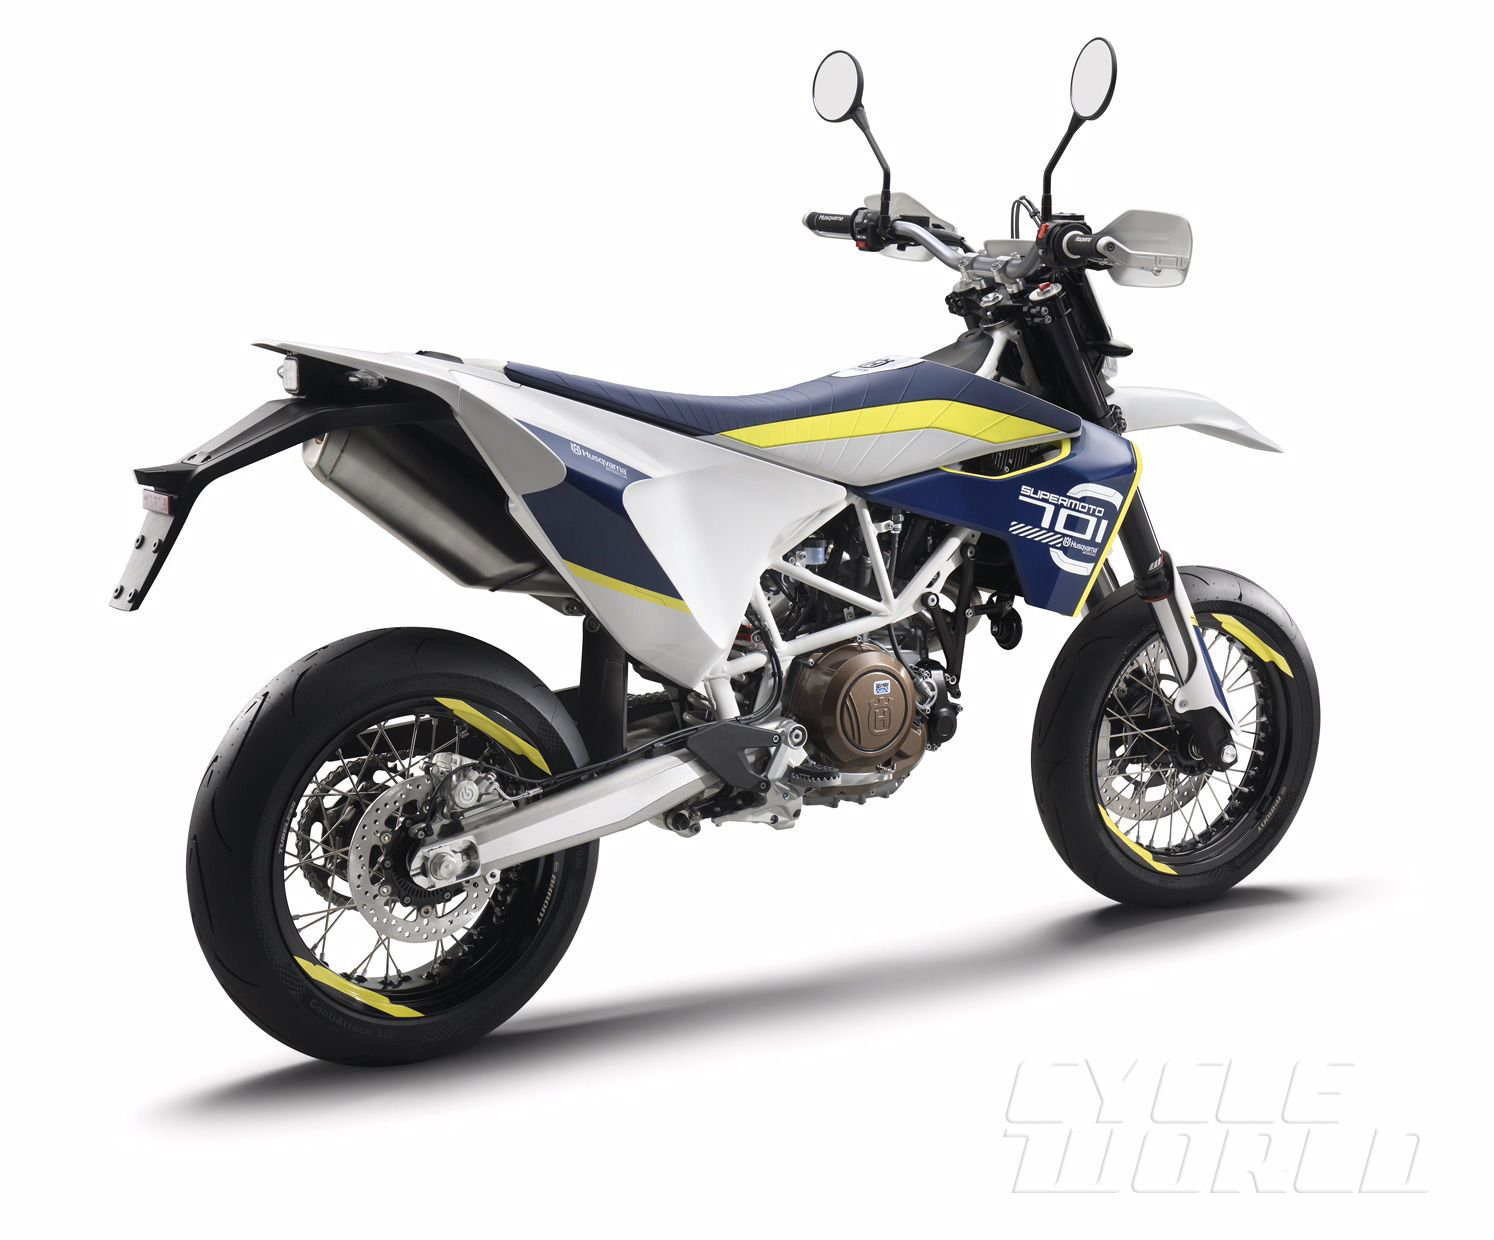 Husqvarna 701 Supermoto First Look Motorcycle Review Cycle World